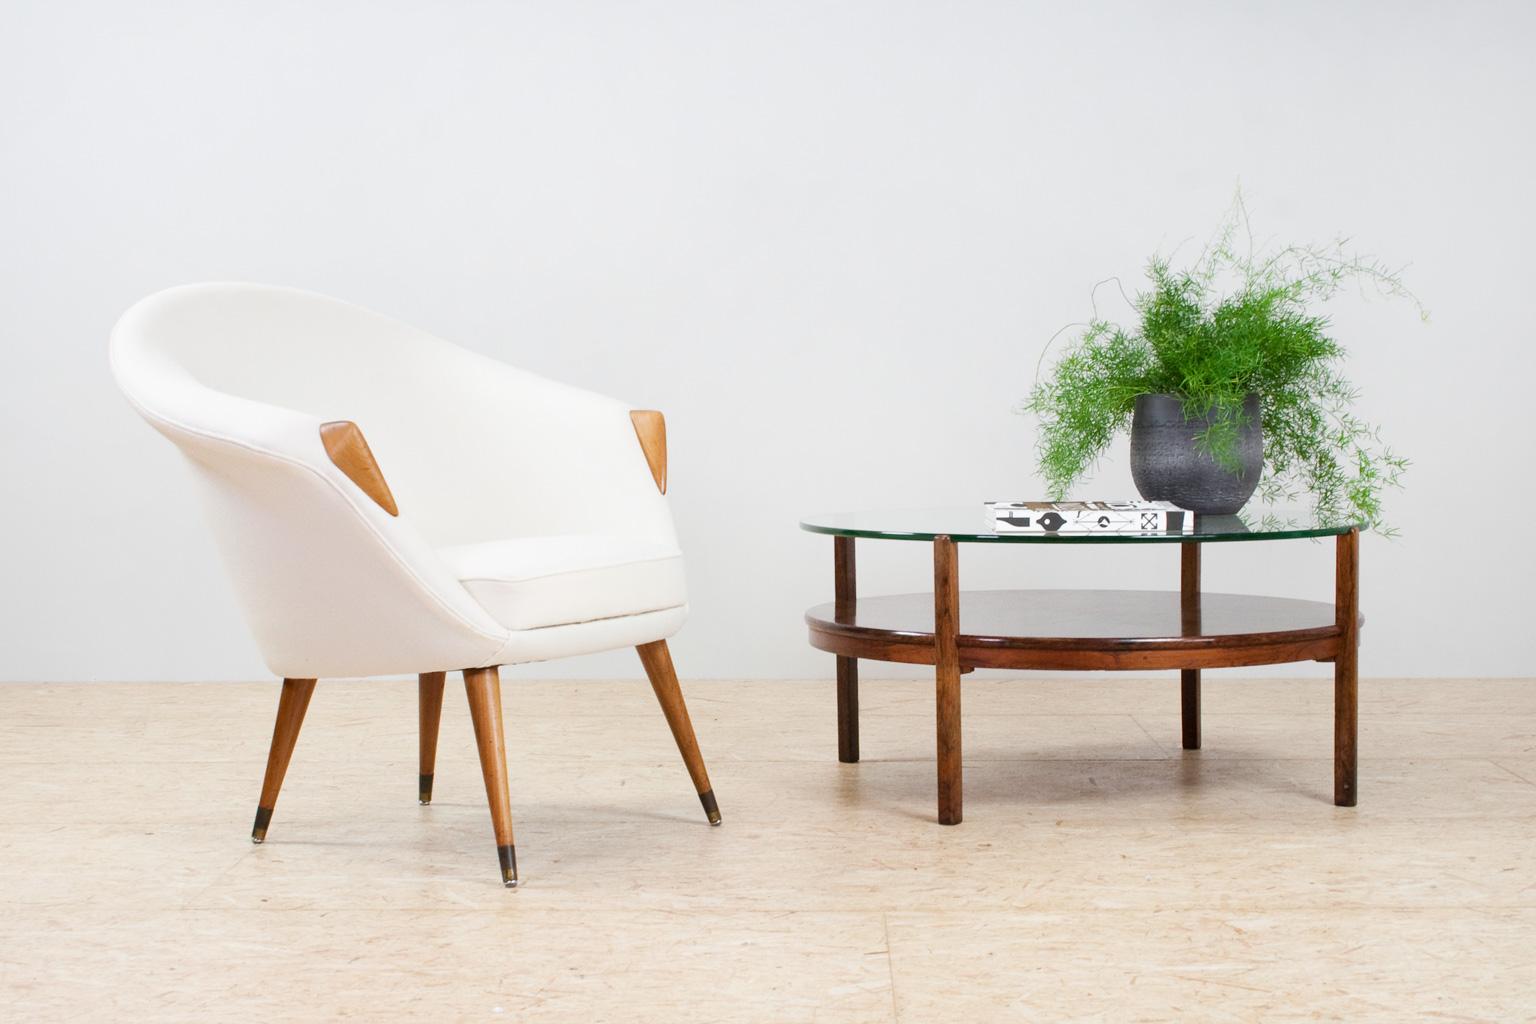 Light and elegantly shaped Scandinavian modern armchairs, Danish origin 1950s. We suspect the designer hand of Nanna Ditzel, yet have not found any label or hard evidence.
The curved seatings have been professionally re-upholstered in an off-white